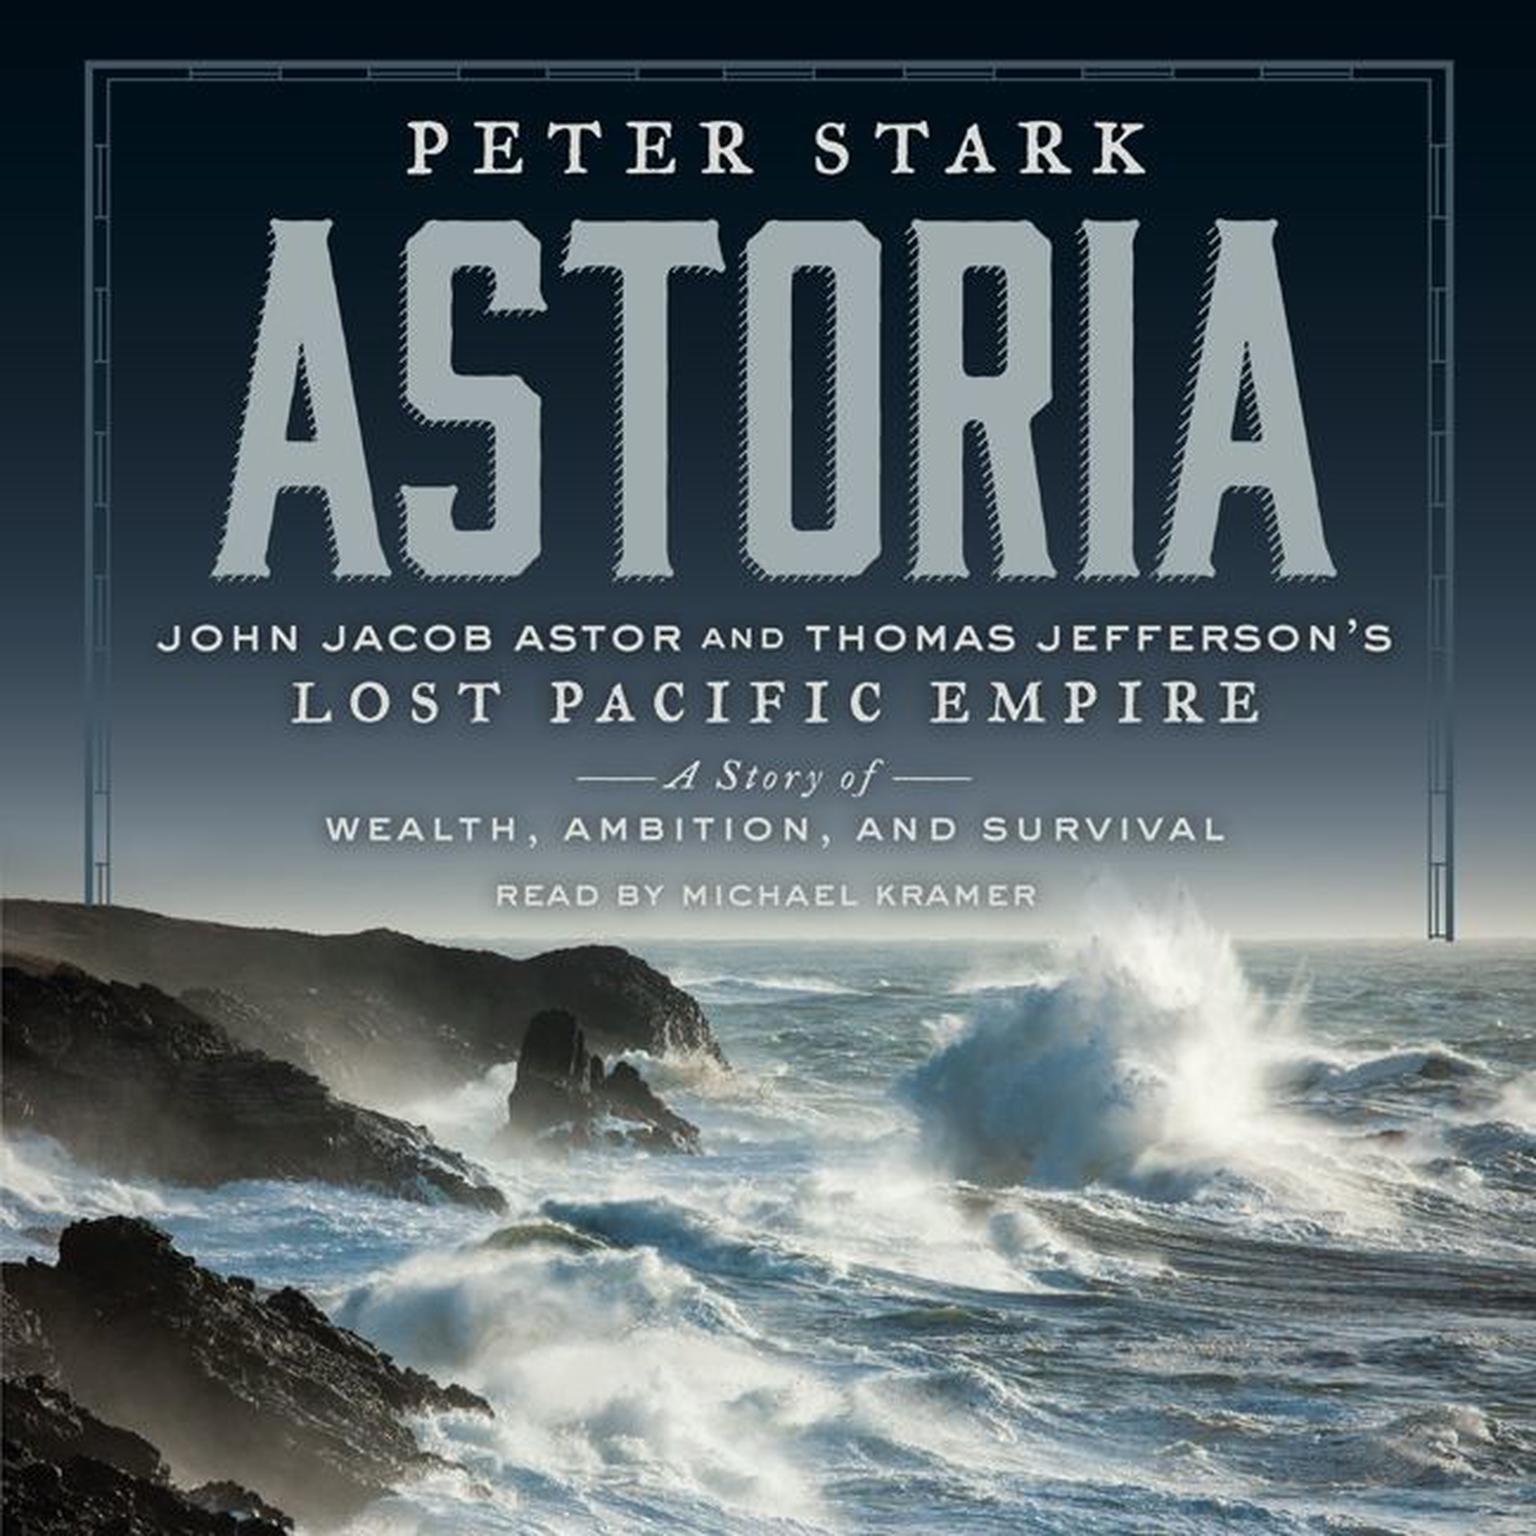 Astoria: John Jacob Astor and Thomas Jeffersons Lost Pacific Empire: A Story of Wealth, Ambition, and Survival Audiobook, by Peter Stark